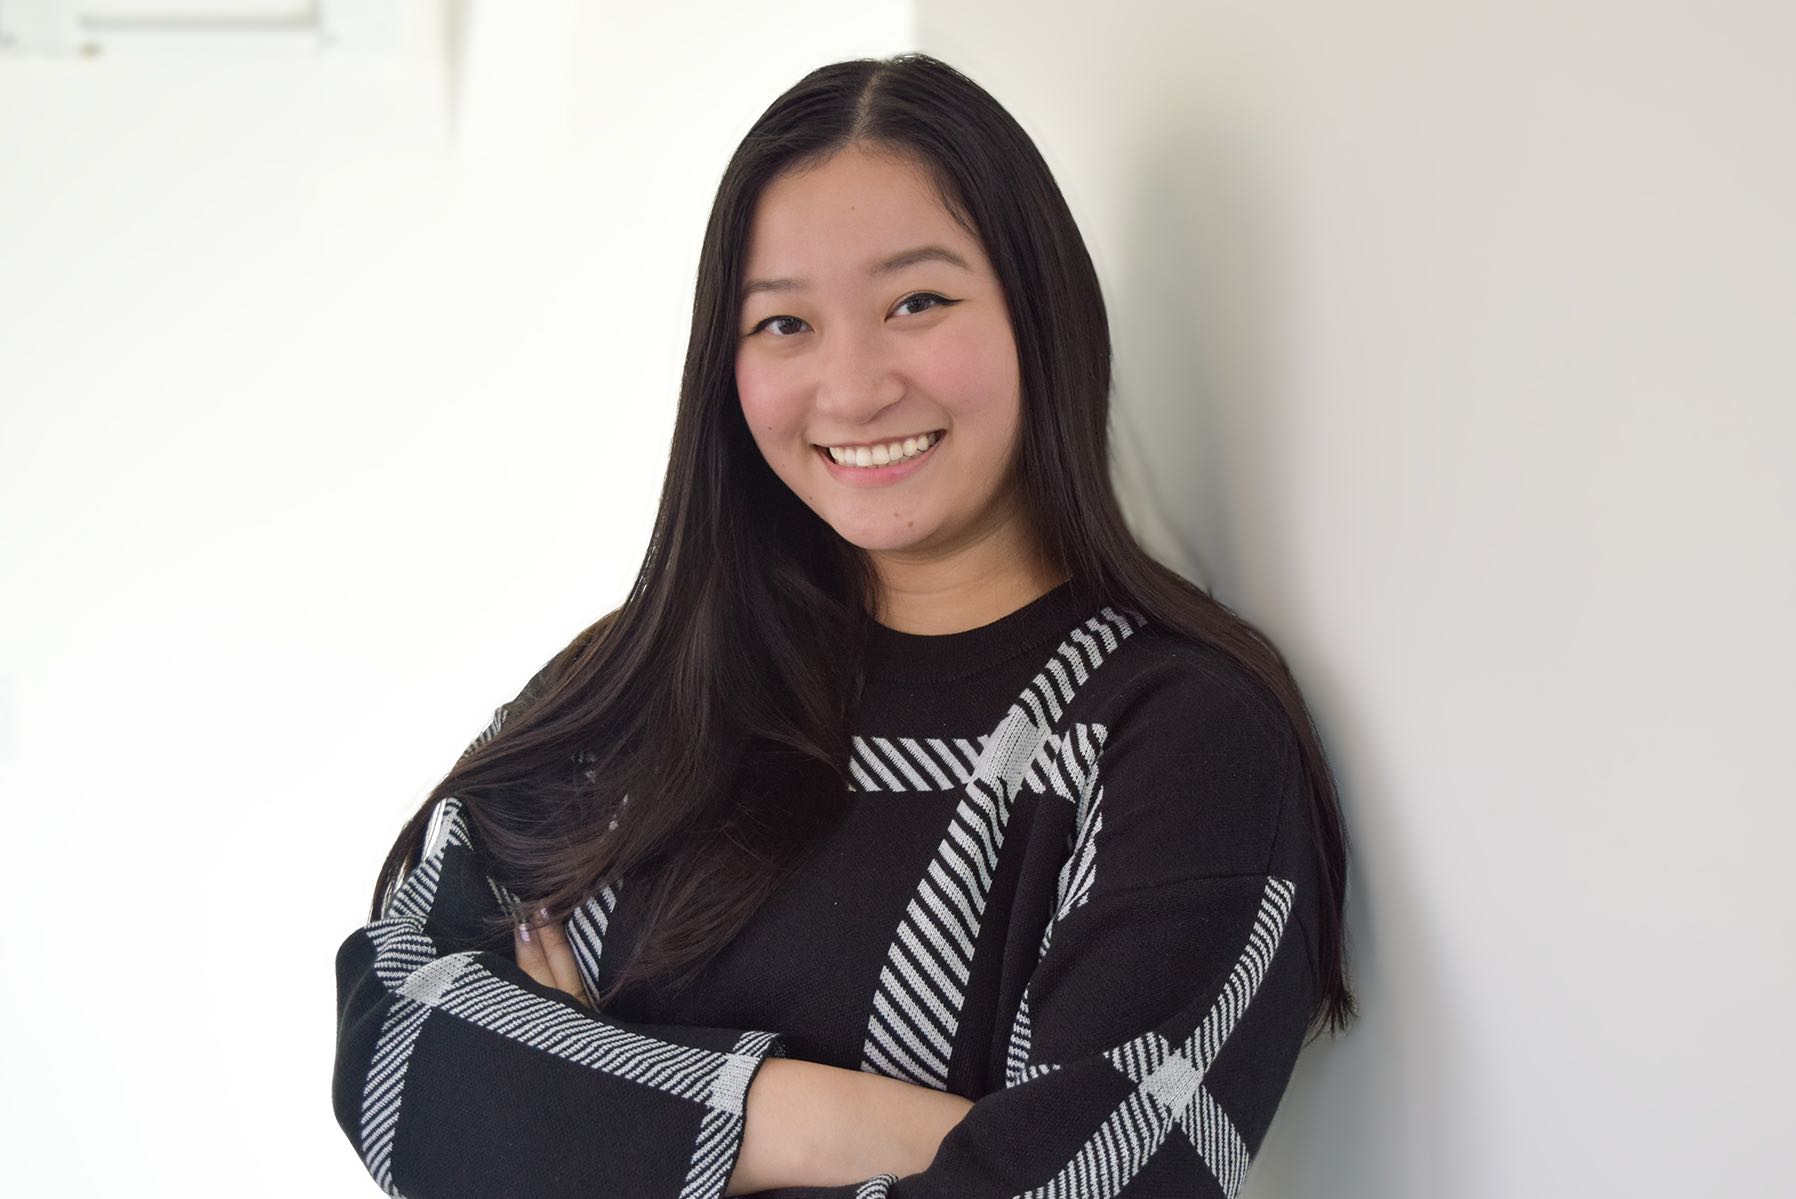 Welcoming Katie Li to Pear as our Data Analyst